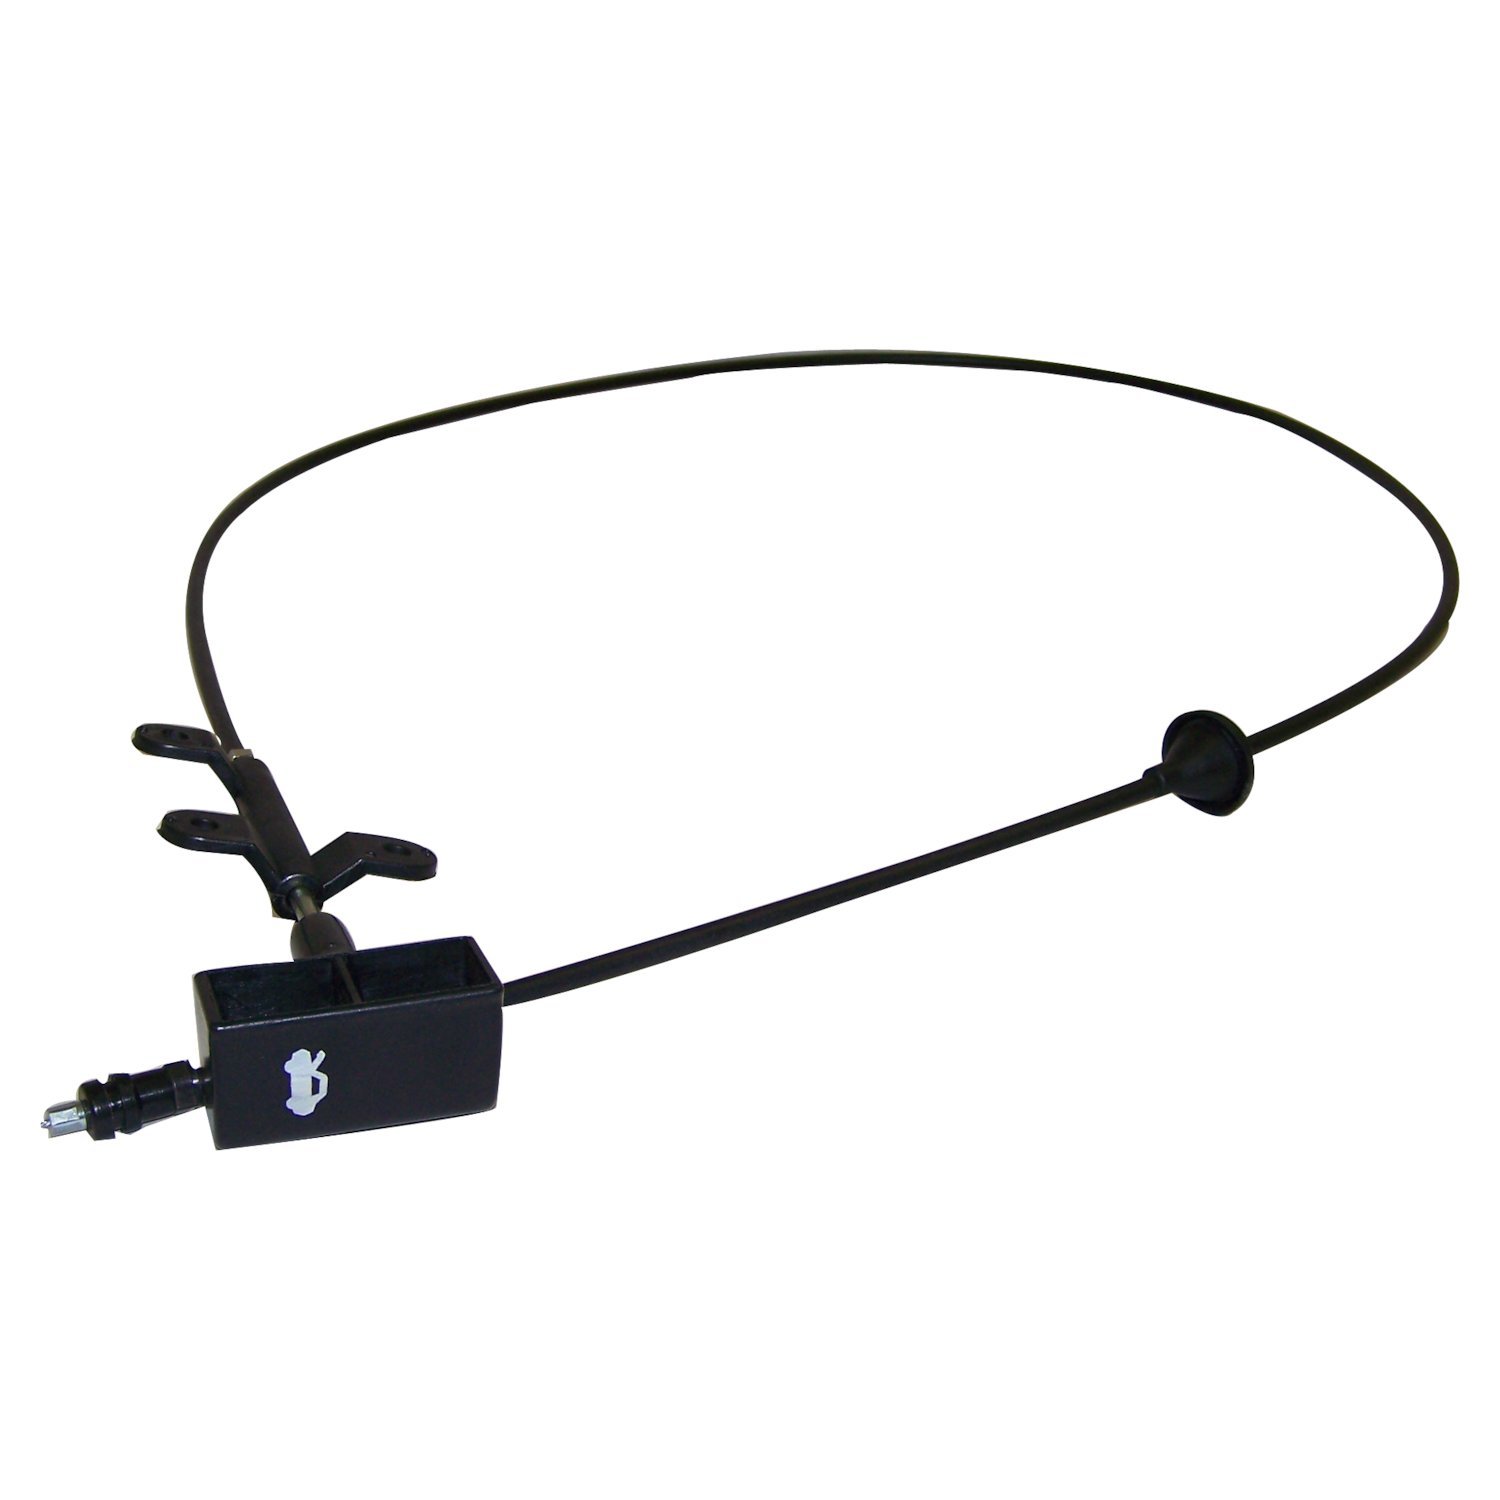 Hood Release Cable for 93/98 ZJ Grand Cherokee & 97/98 ZG Grand Cherokee